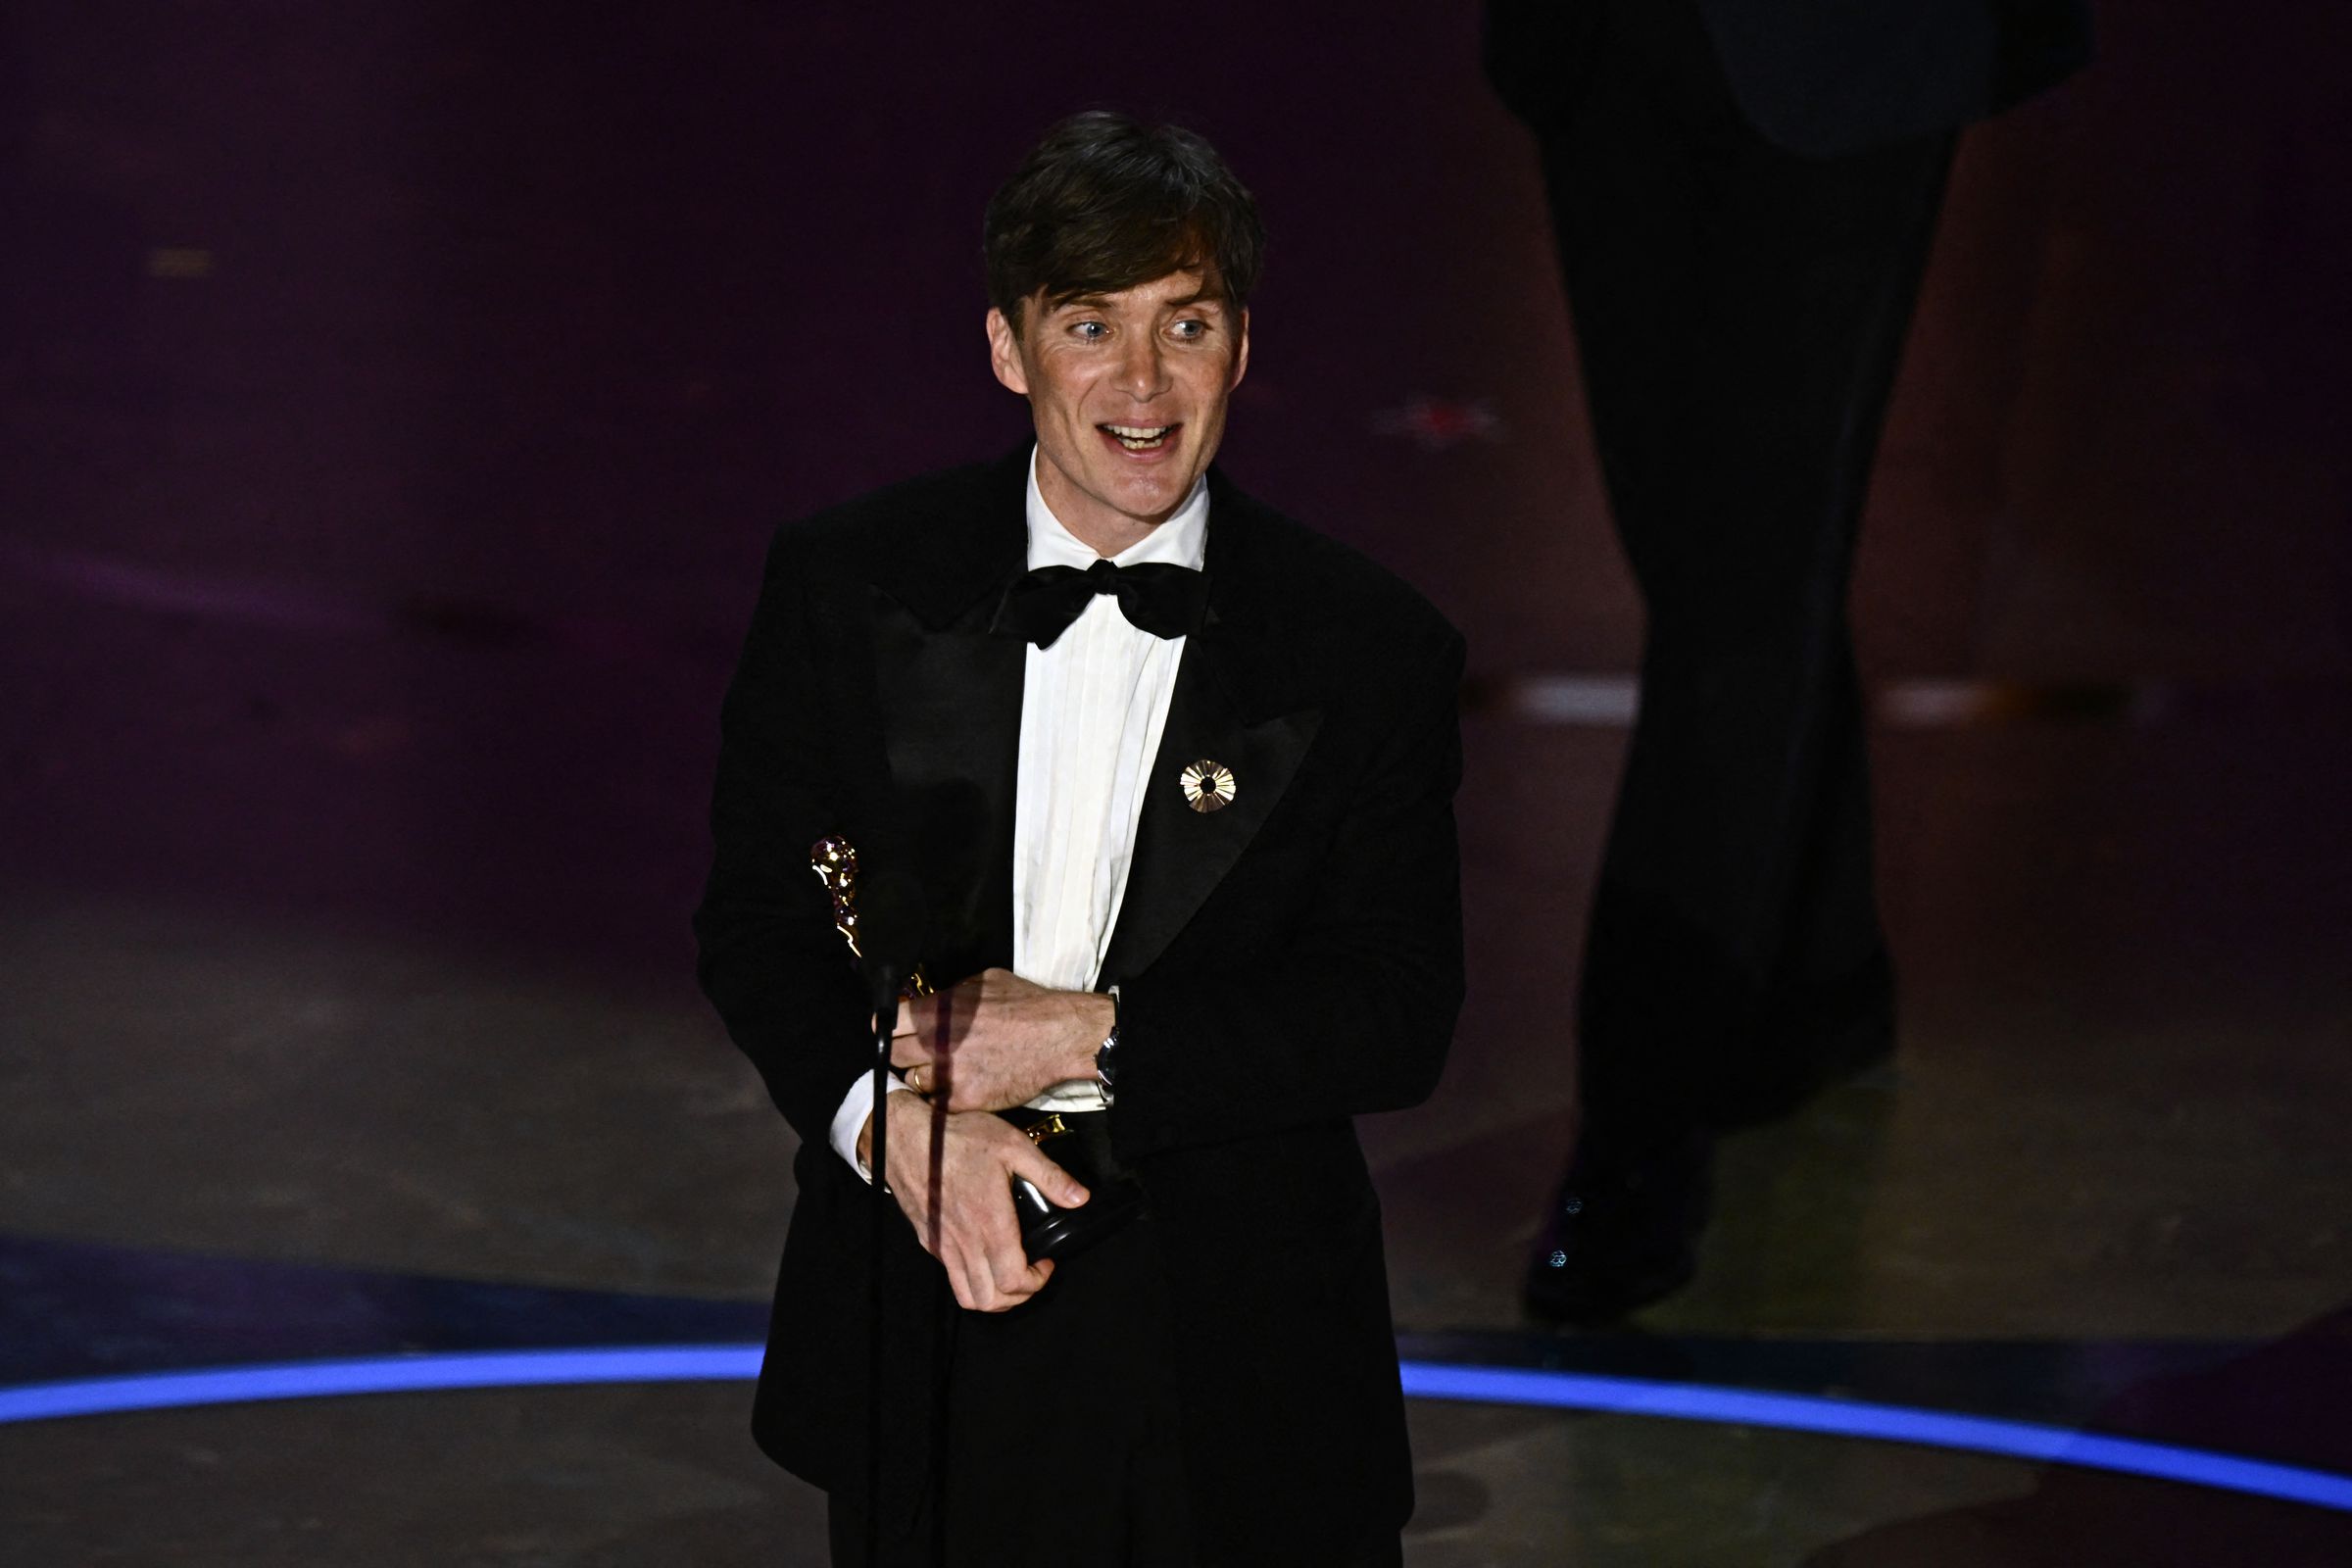 Irish actor Cillian Murphy accepts the award for Best Actor in a Leading Role for “Oppenheimer” onstage during the 96th Annual Academy Awards at the Dolby Theatre in Hollywood, California on March 10, 2024. (Photo by Patrick T. Fallon / AFP)